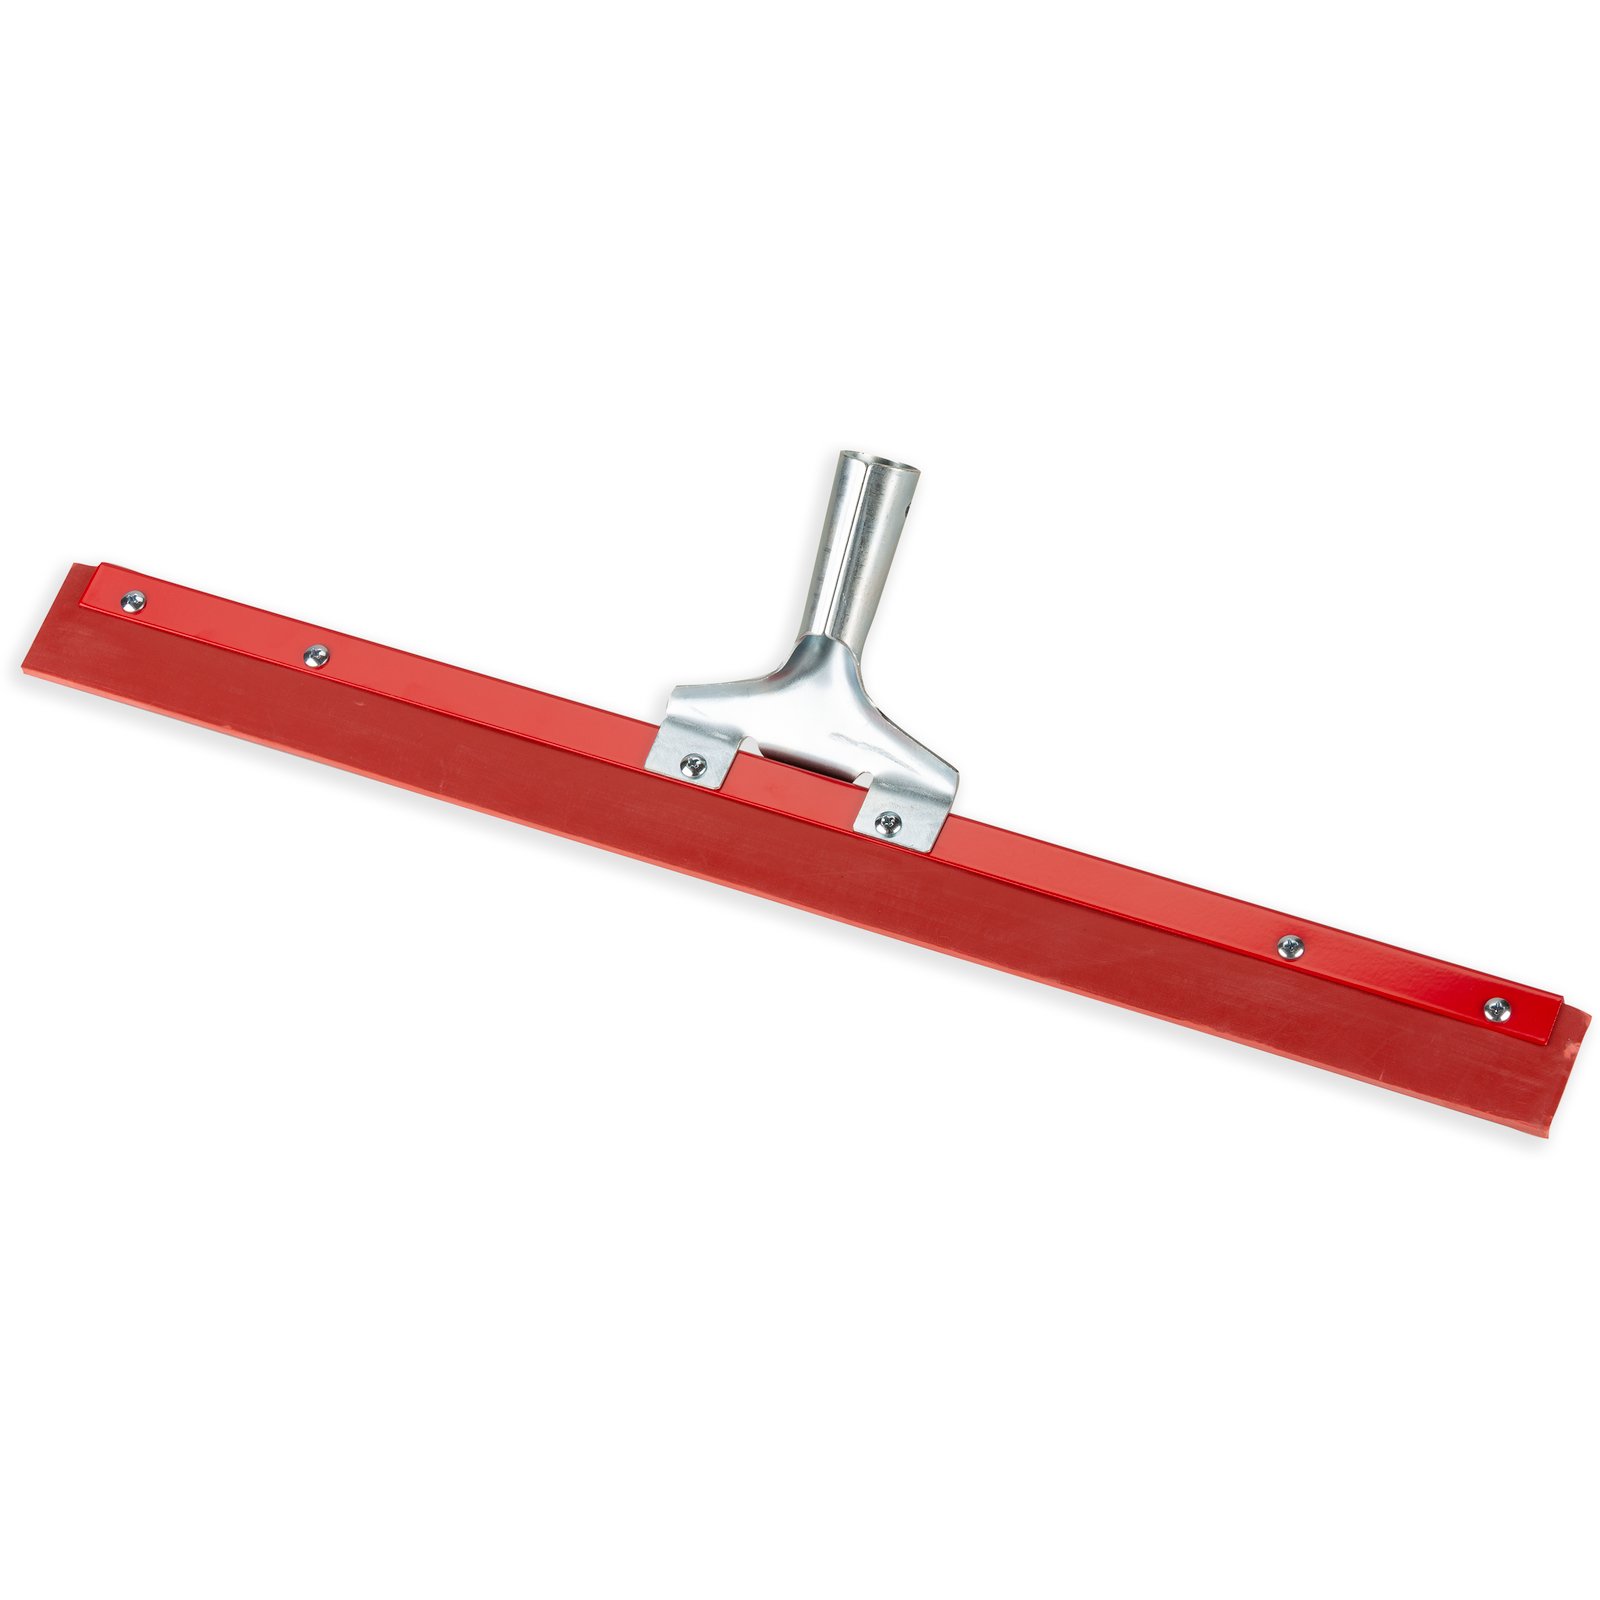 DSV Standard Professional Stainless Aluminum Floor Squeegee | 30 57 | Silicone Rubber Head 23.6, Size: 30'' - 57'', Red